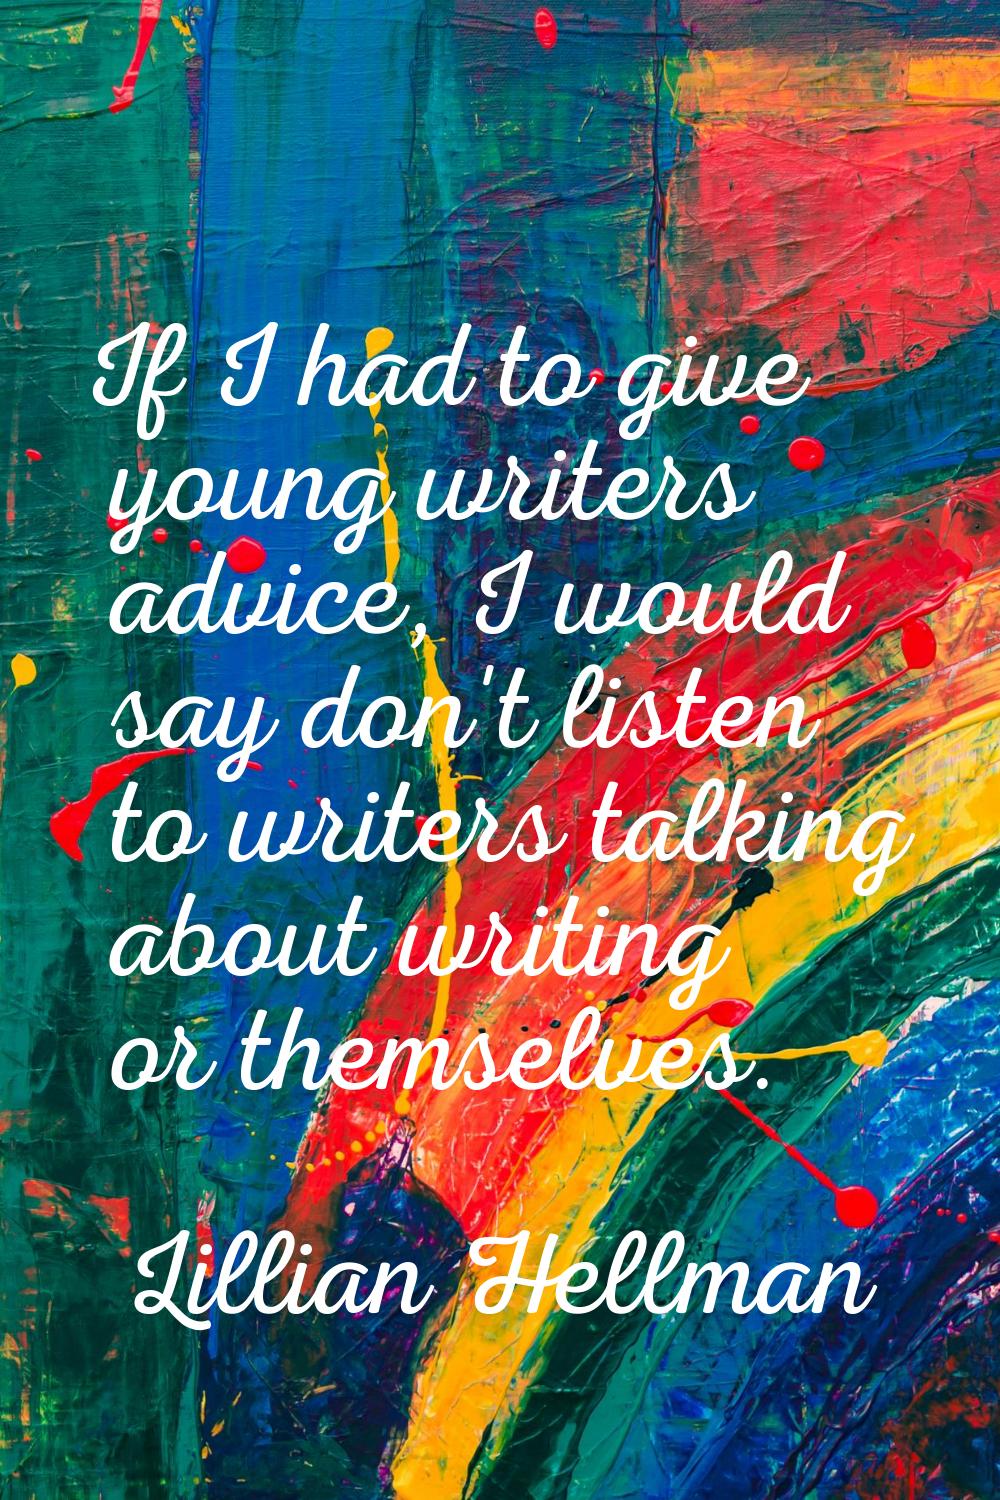 If I had to give young writers advice, I would say don't listen to writers talking about writing or